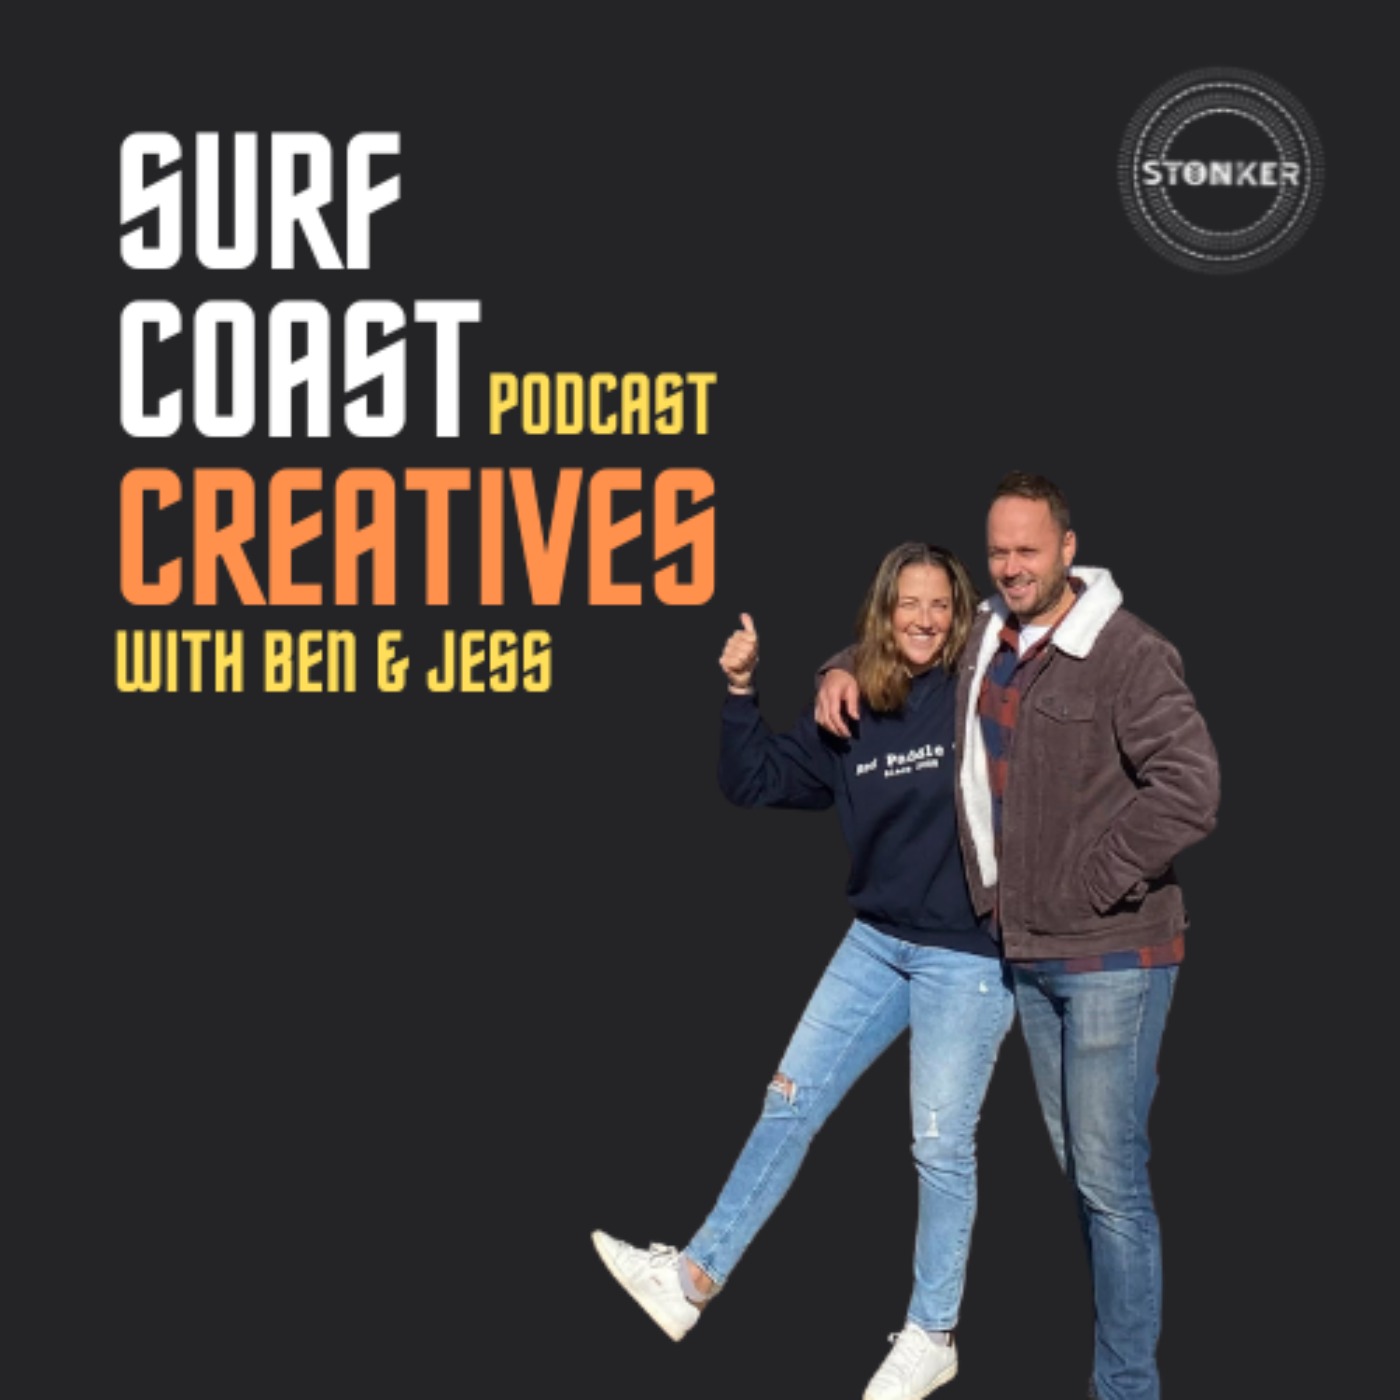 #51: We miss the people! - Ben & Jess from Surf Coast Creatives